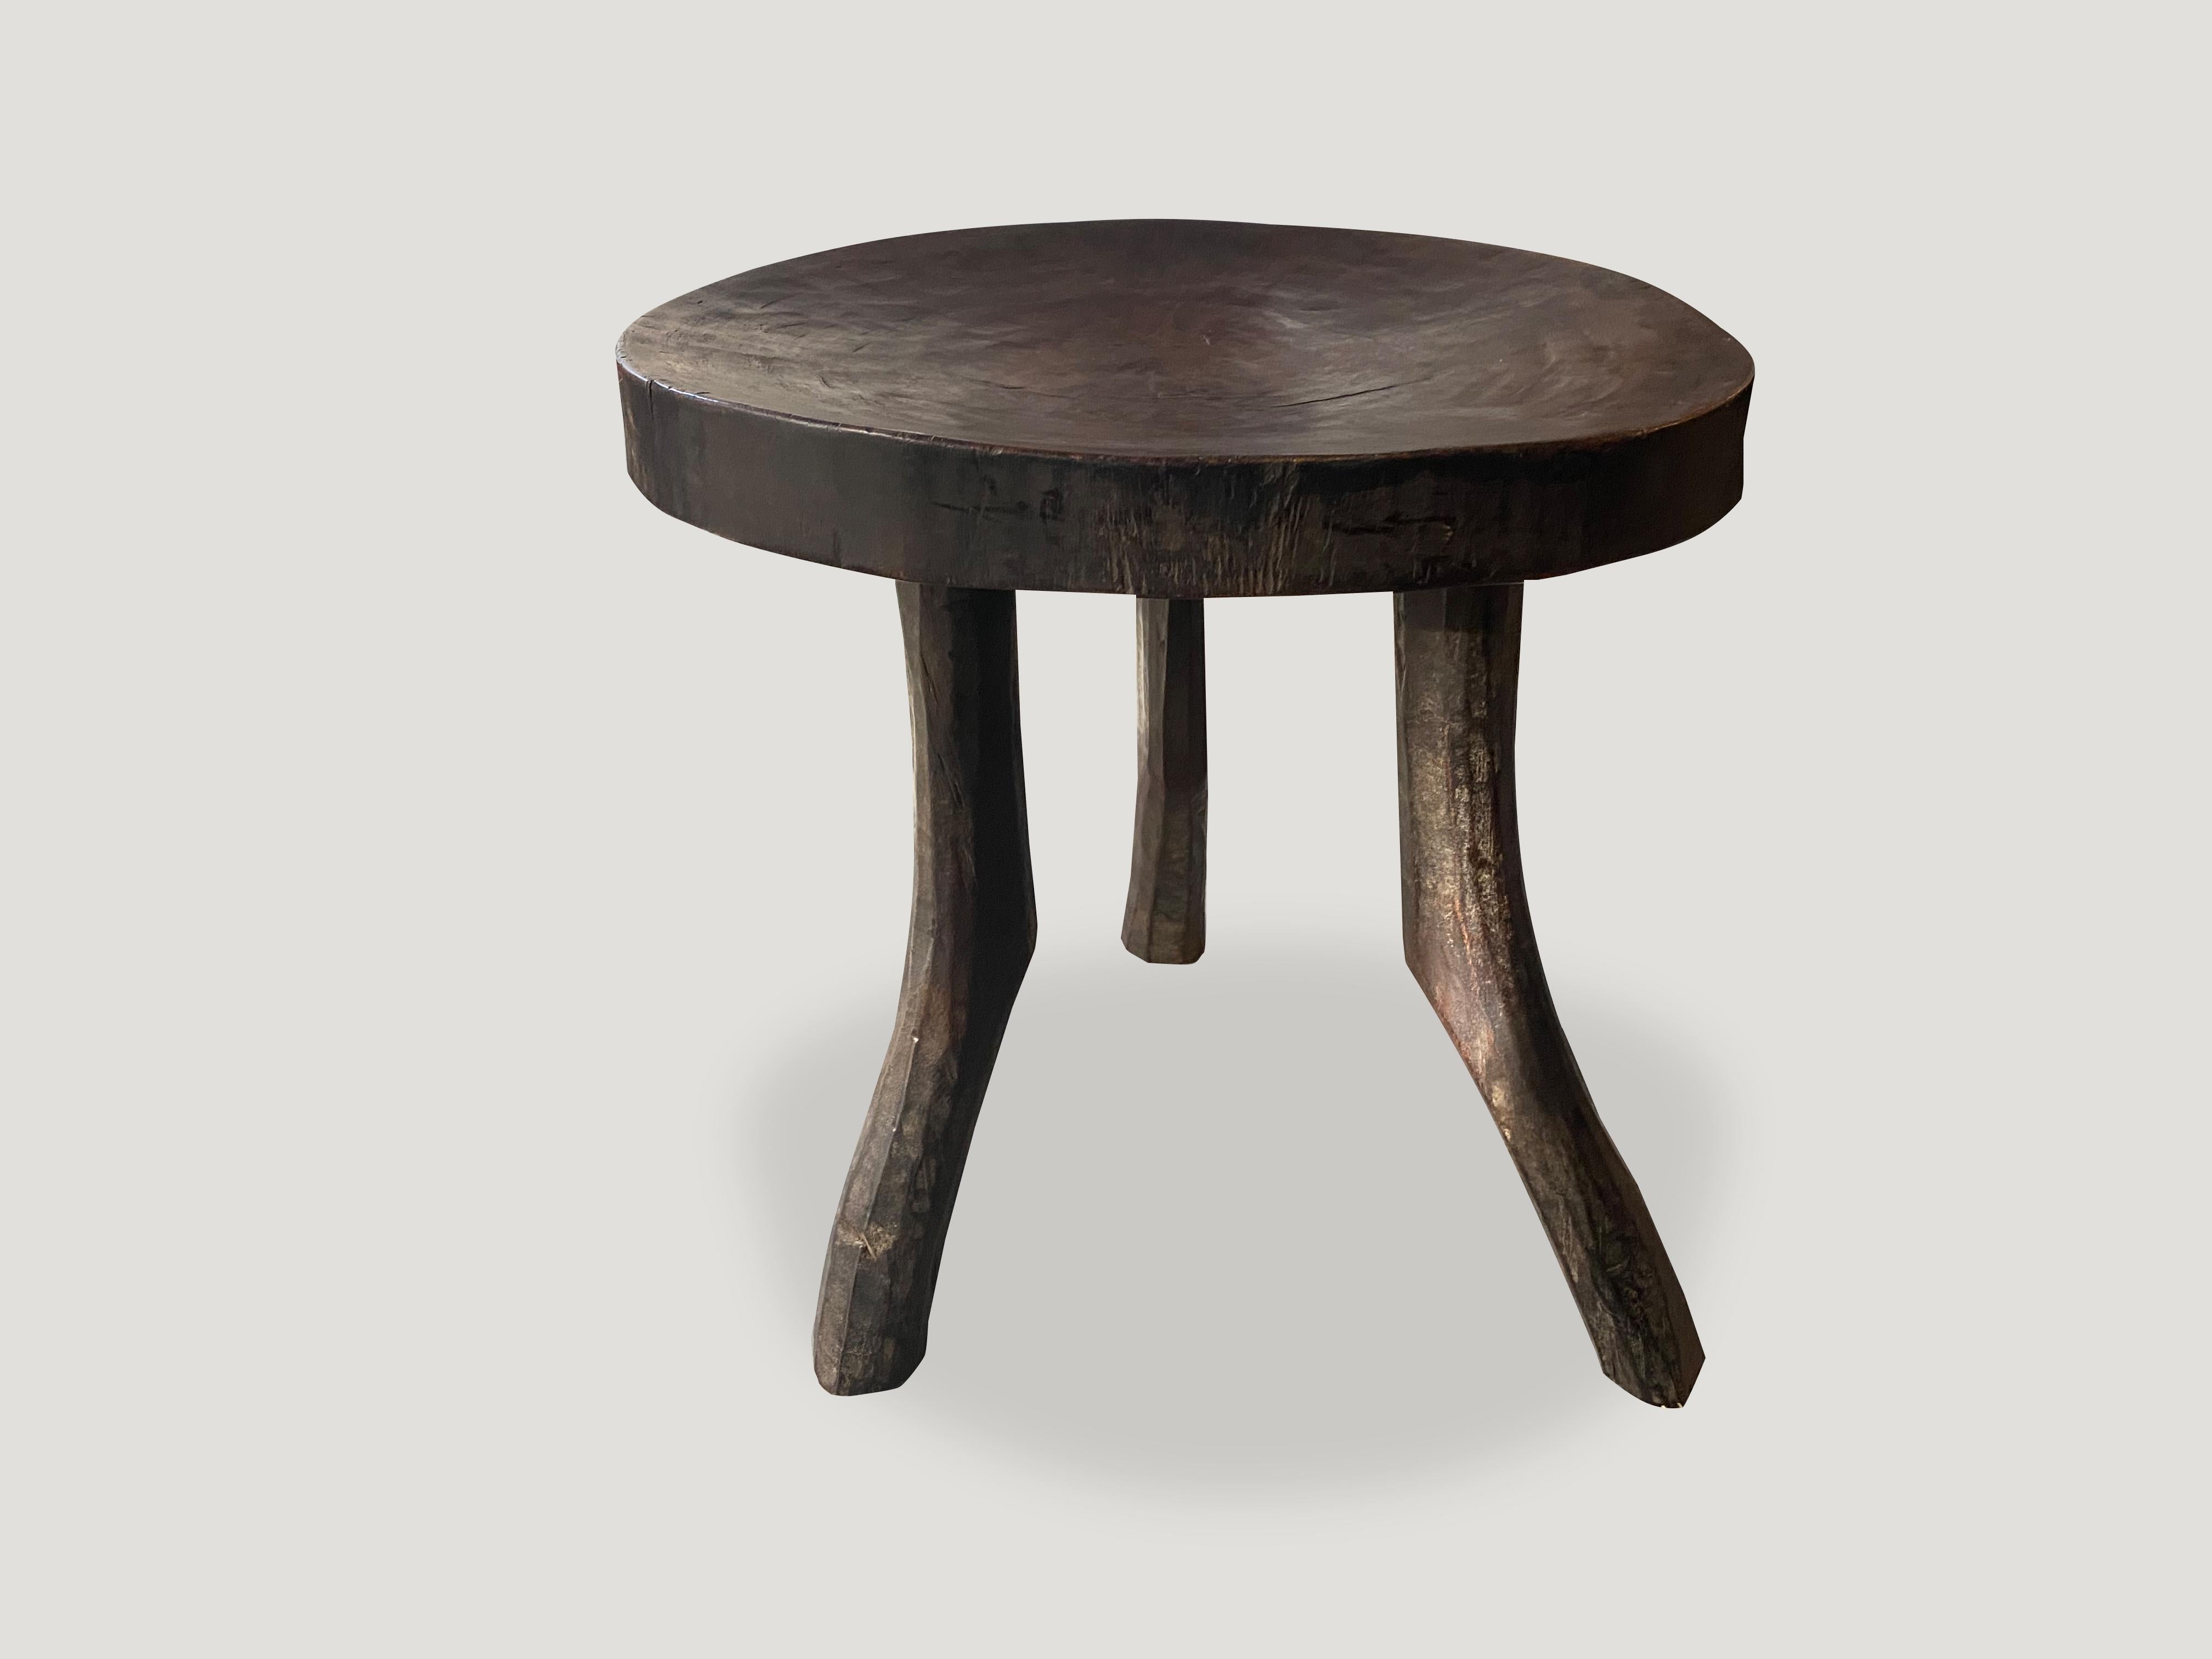 Hand carved sculptural African mahogany stool or side table. Great for placing a book or perhaps towels in a bathroom, magazines etc.

This stool or side table was sourced in the spirit of wabi-sabi, a Japanese philosophy that beauty can be found